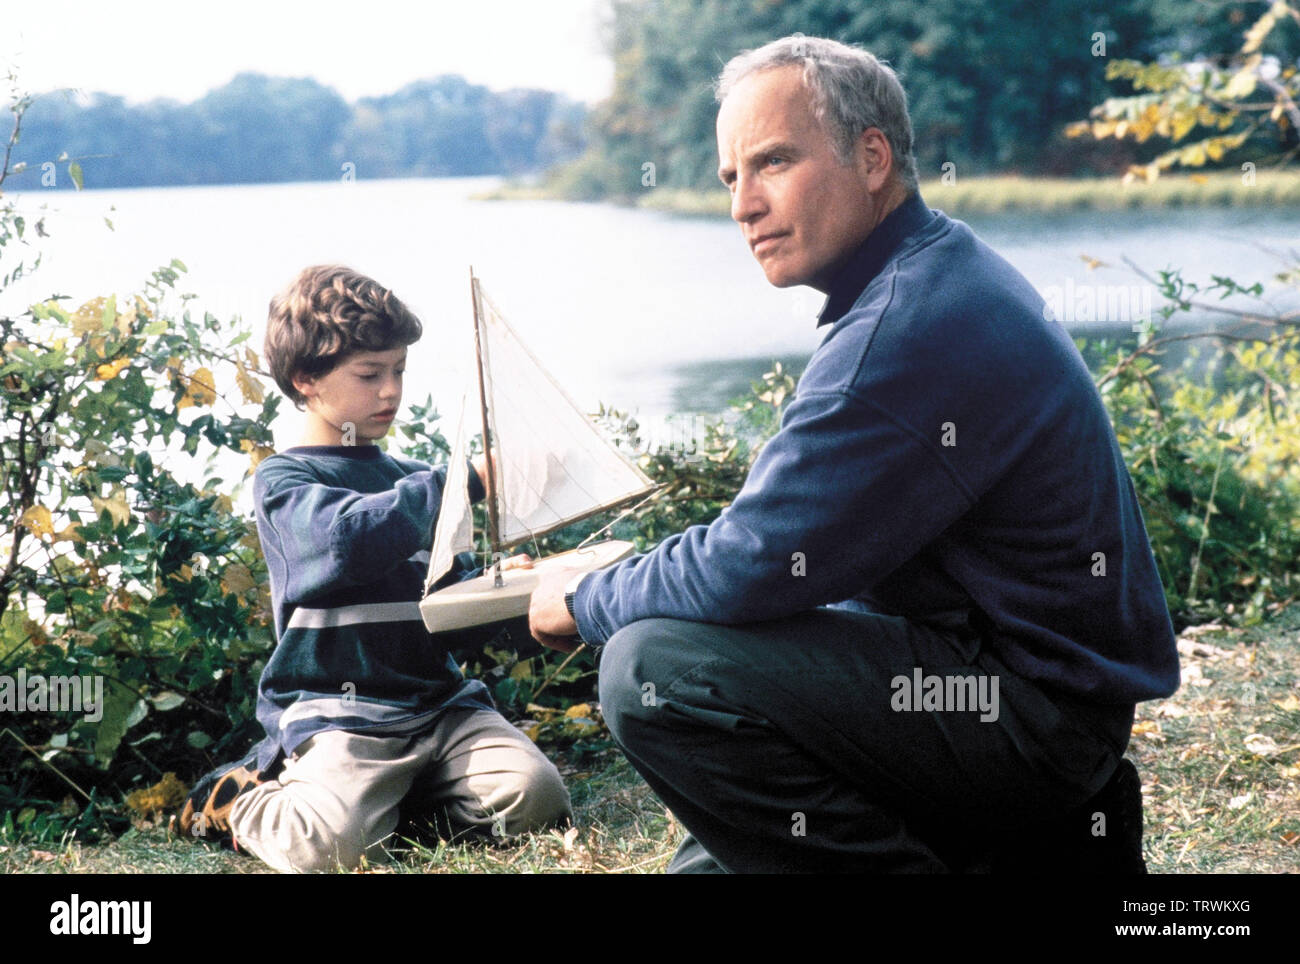 RICHARD DREYFUSS and BEN FAULKNER in SILENT FALL (1994). Copyright: Editorial use only. No merchandising or book covers. This is a publicly distributed handout. Access rights only, no license of copyright provided. Only to be reproduced in conjunction with promotion of this film. Credit: MORGAN CREEK/WARNER BROS / O'NEAL, JANE / Album Stock Photo